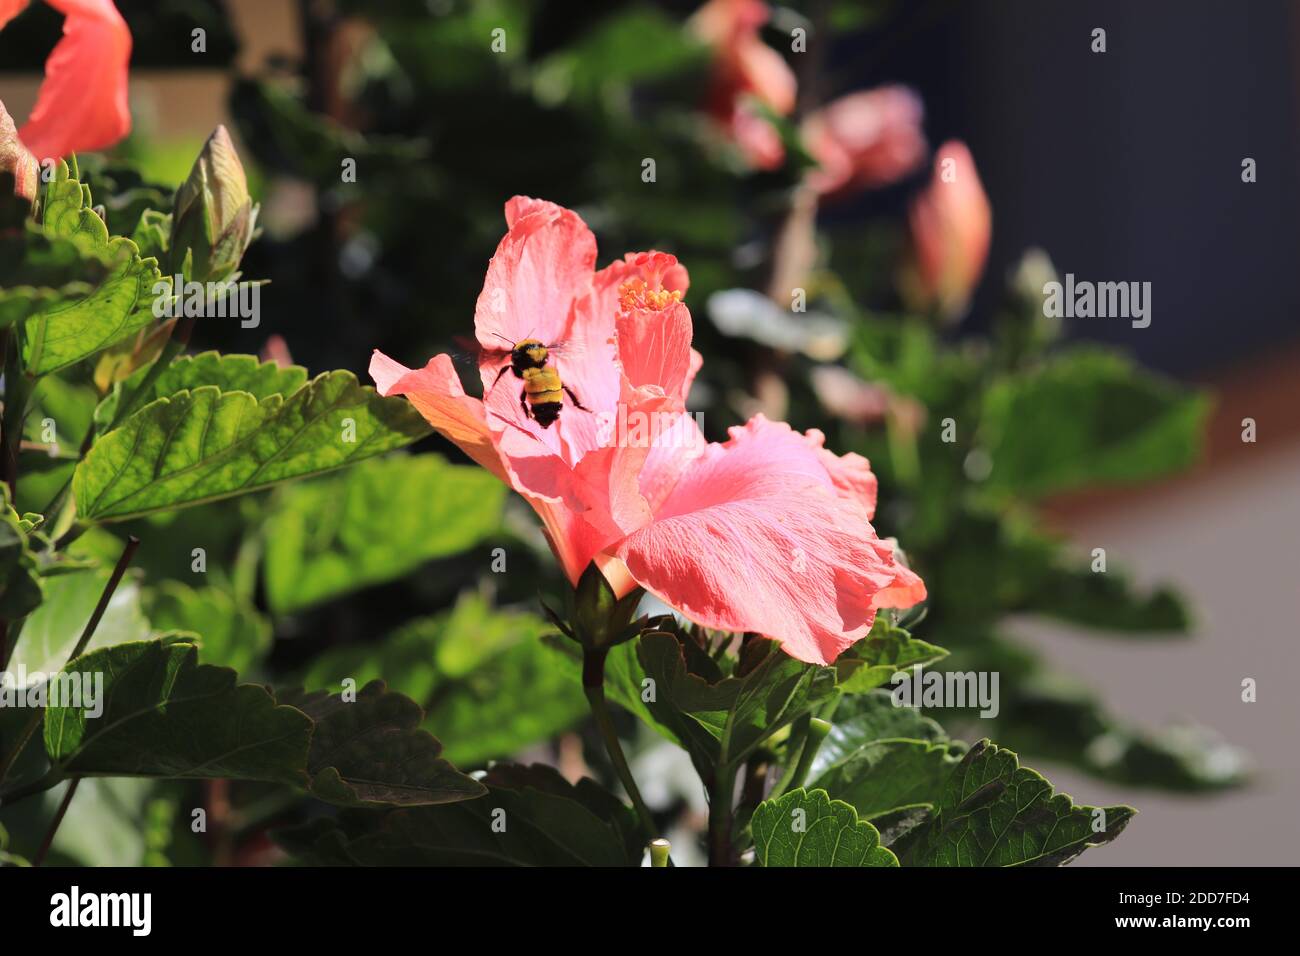 Bumblebee taking off a pink hibiscus flower Stock Photo